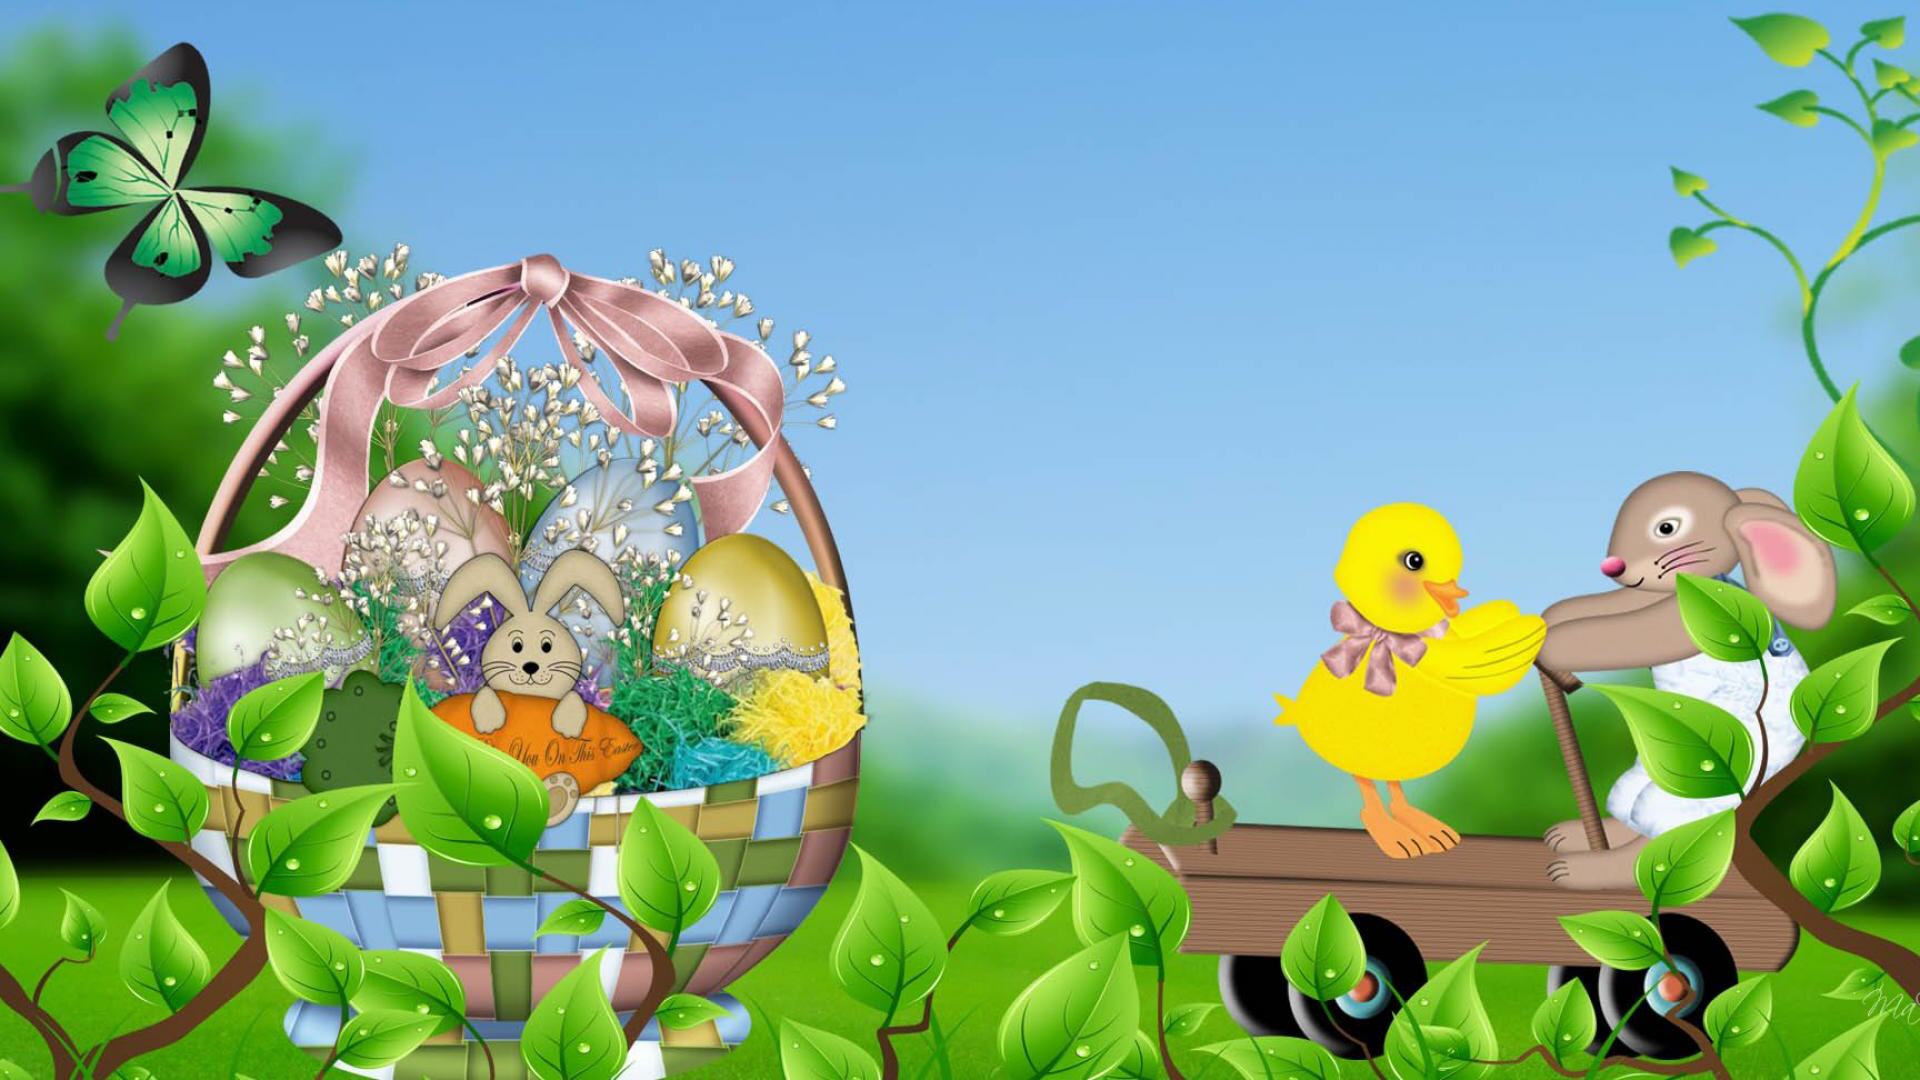 The Easter Wallpaper Category Of HD Animated